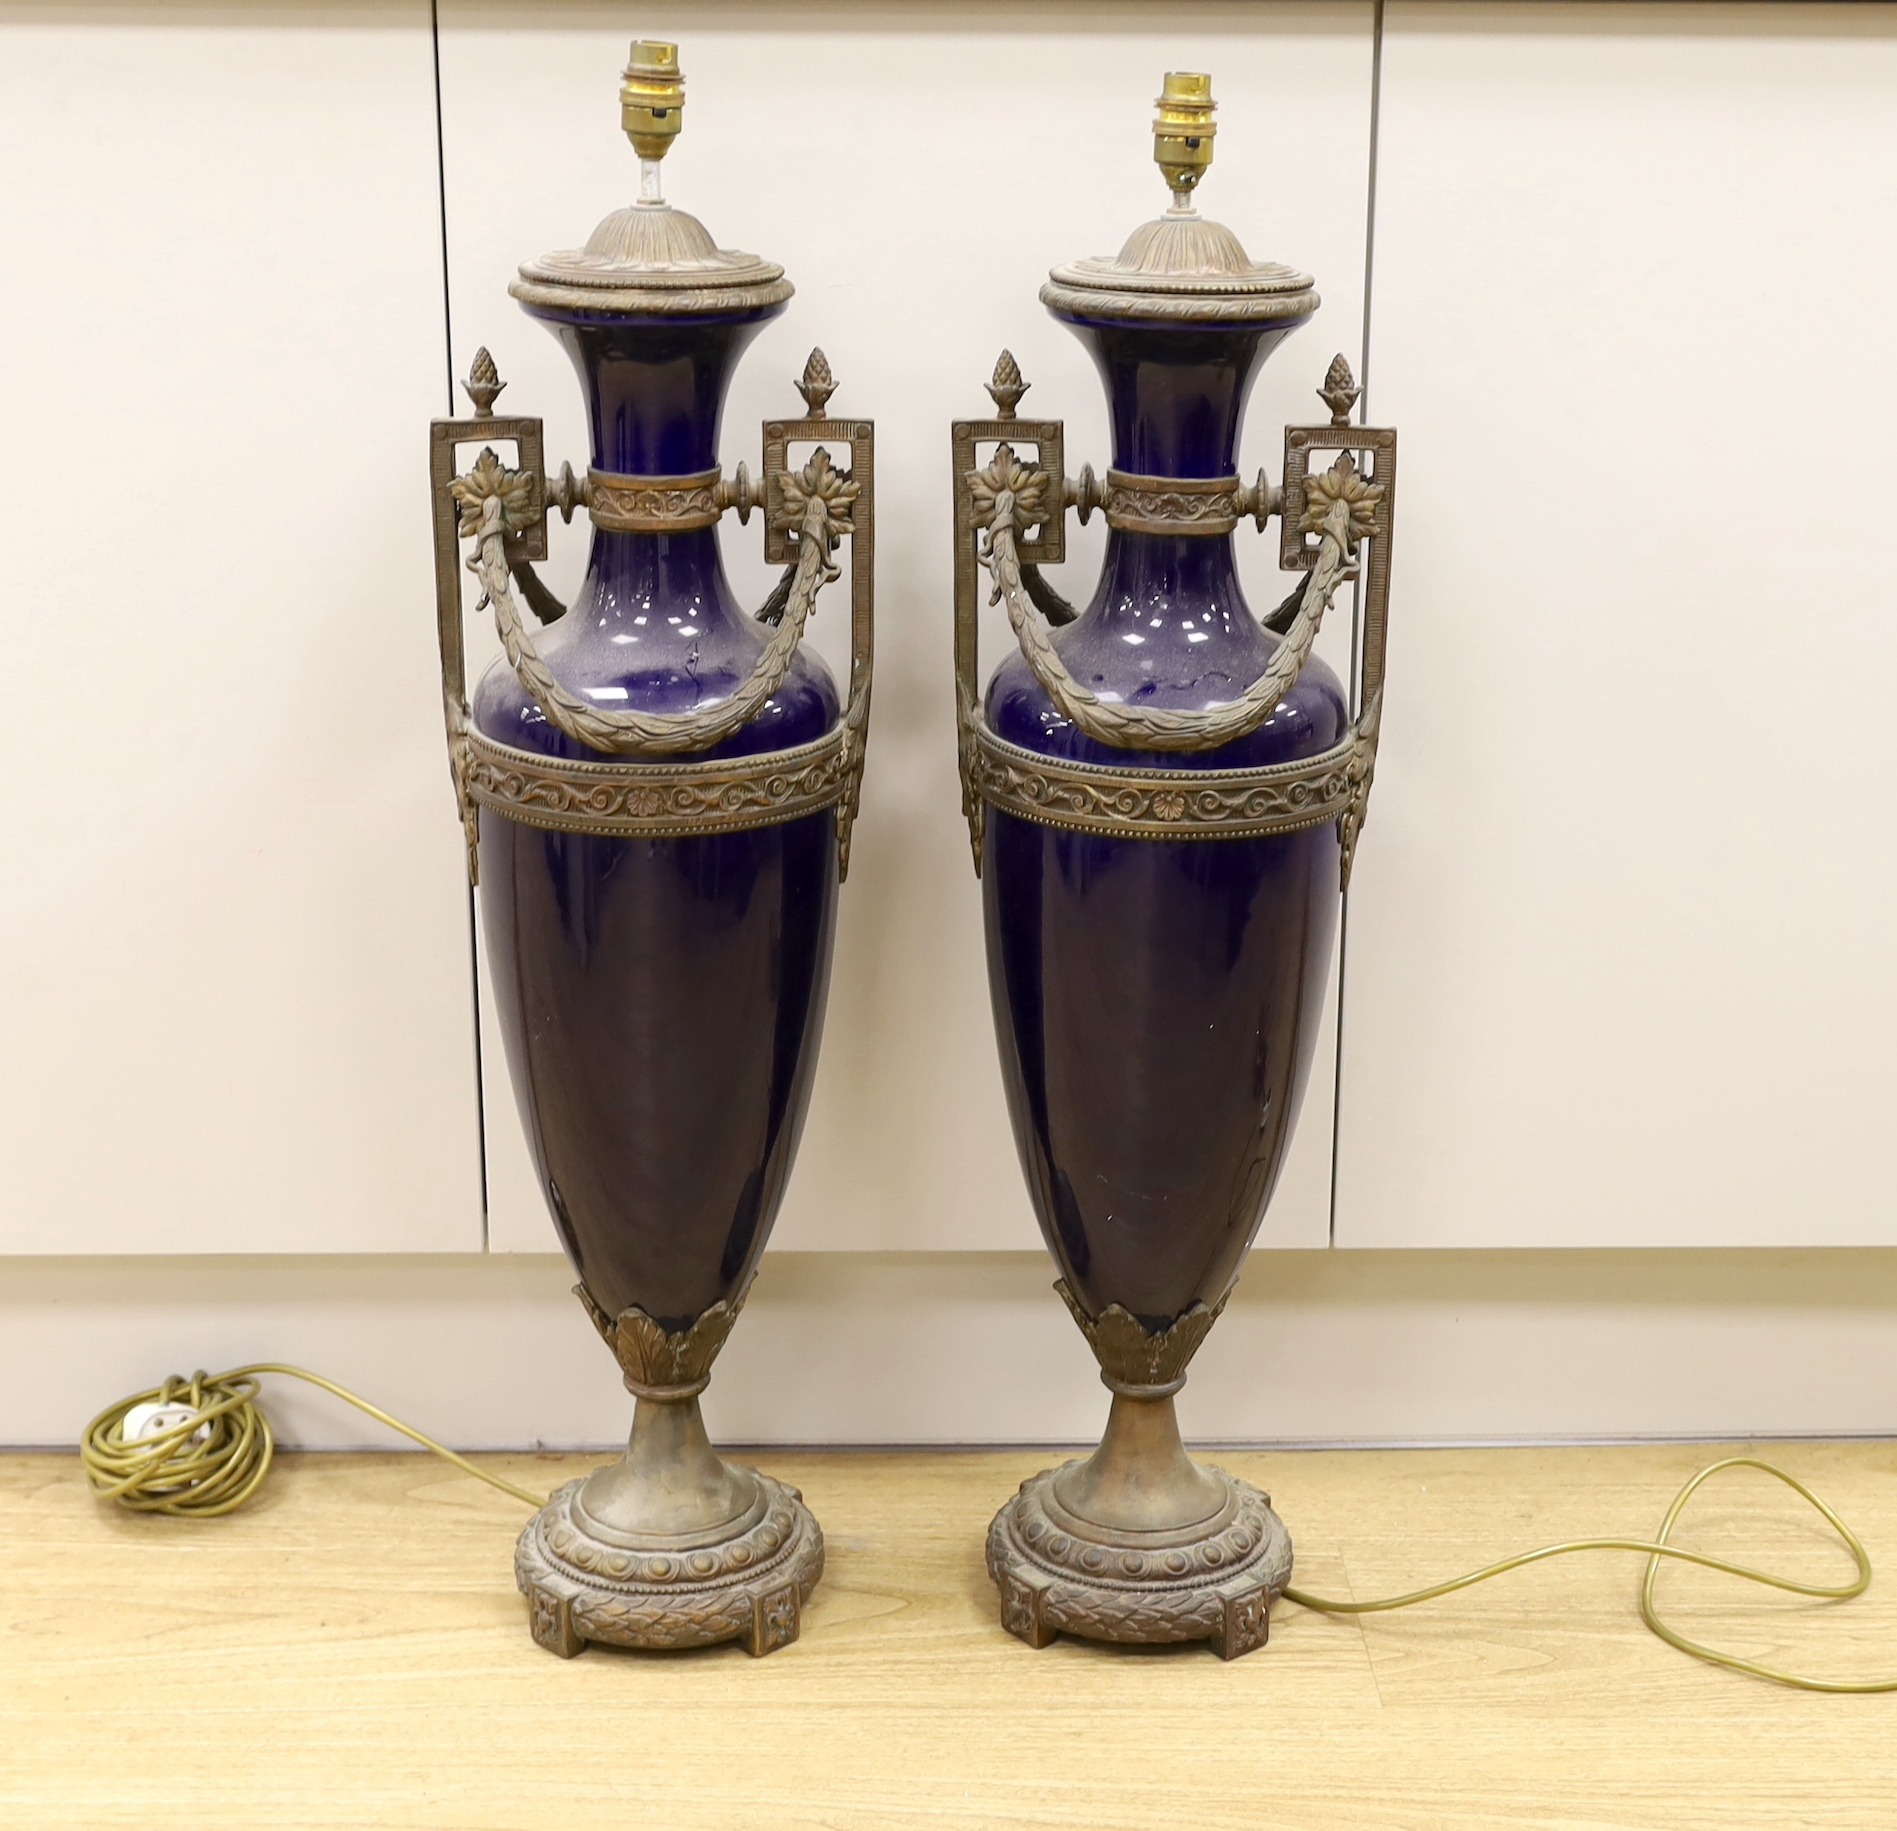 A pair of large Sevres style cobalt blue glazed ceramic lamps with bronzed mounts, 84cm total height